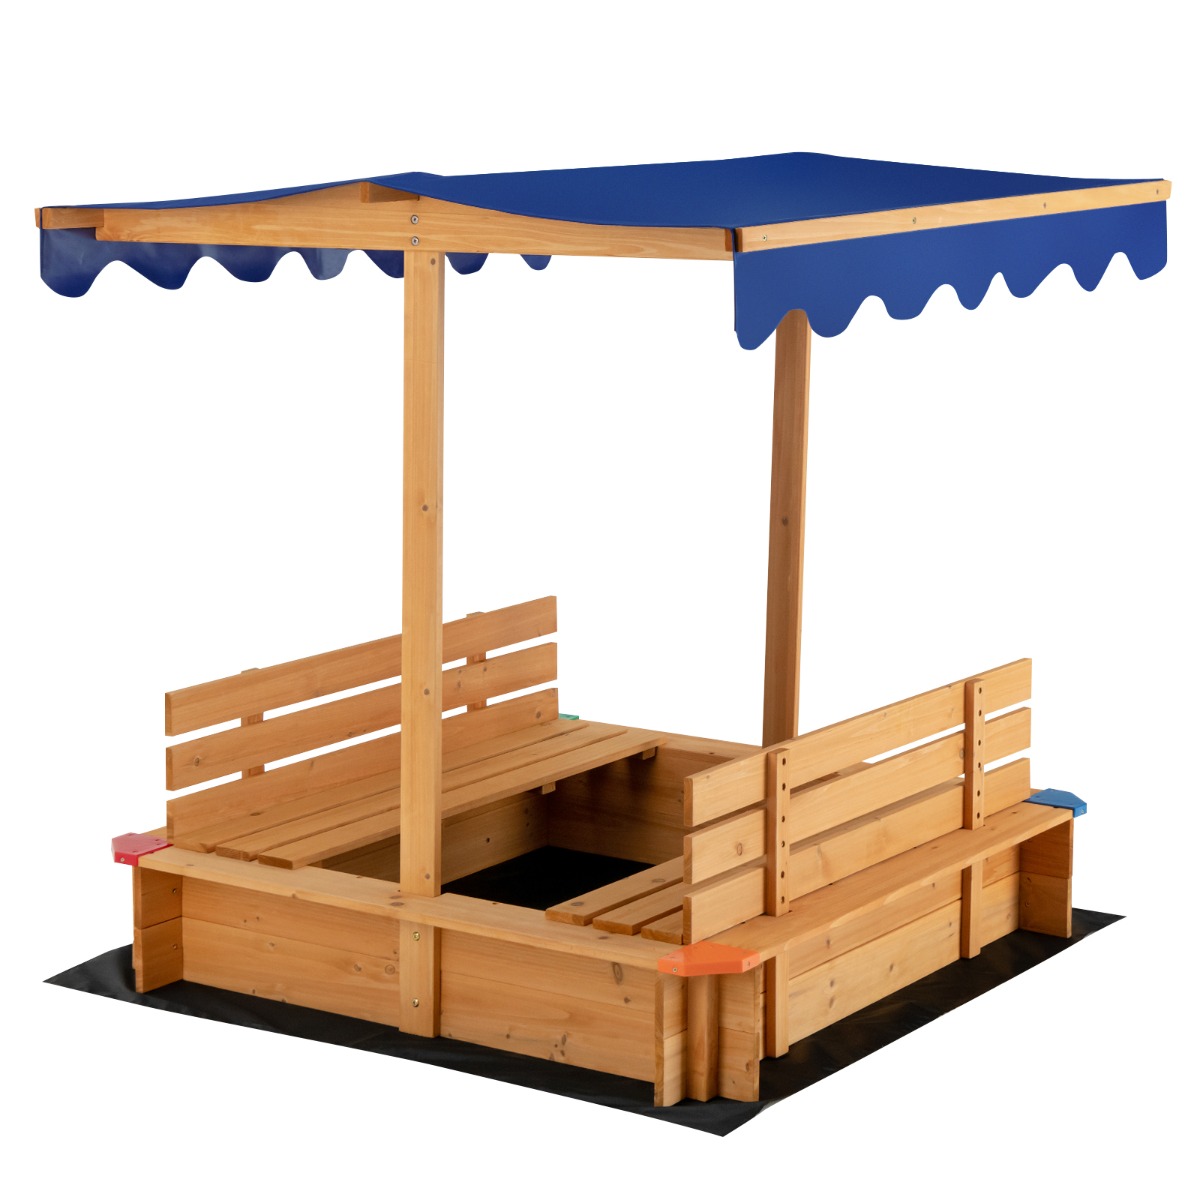 Kids Wooden Sandbox with Canopy Suitable for Backyard Home Lawn Garden